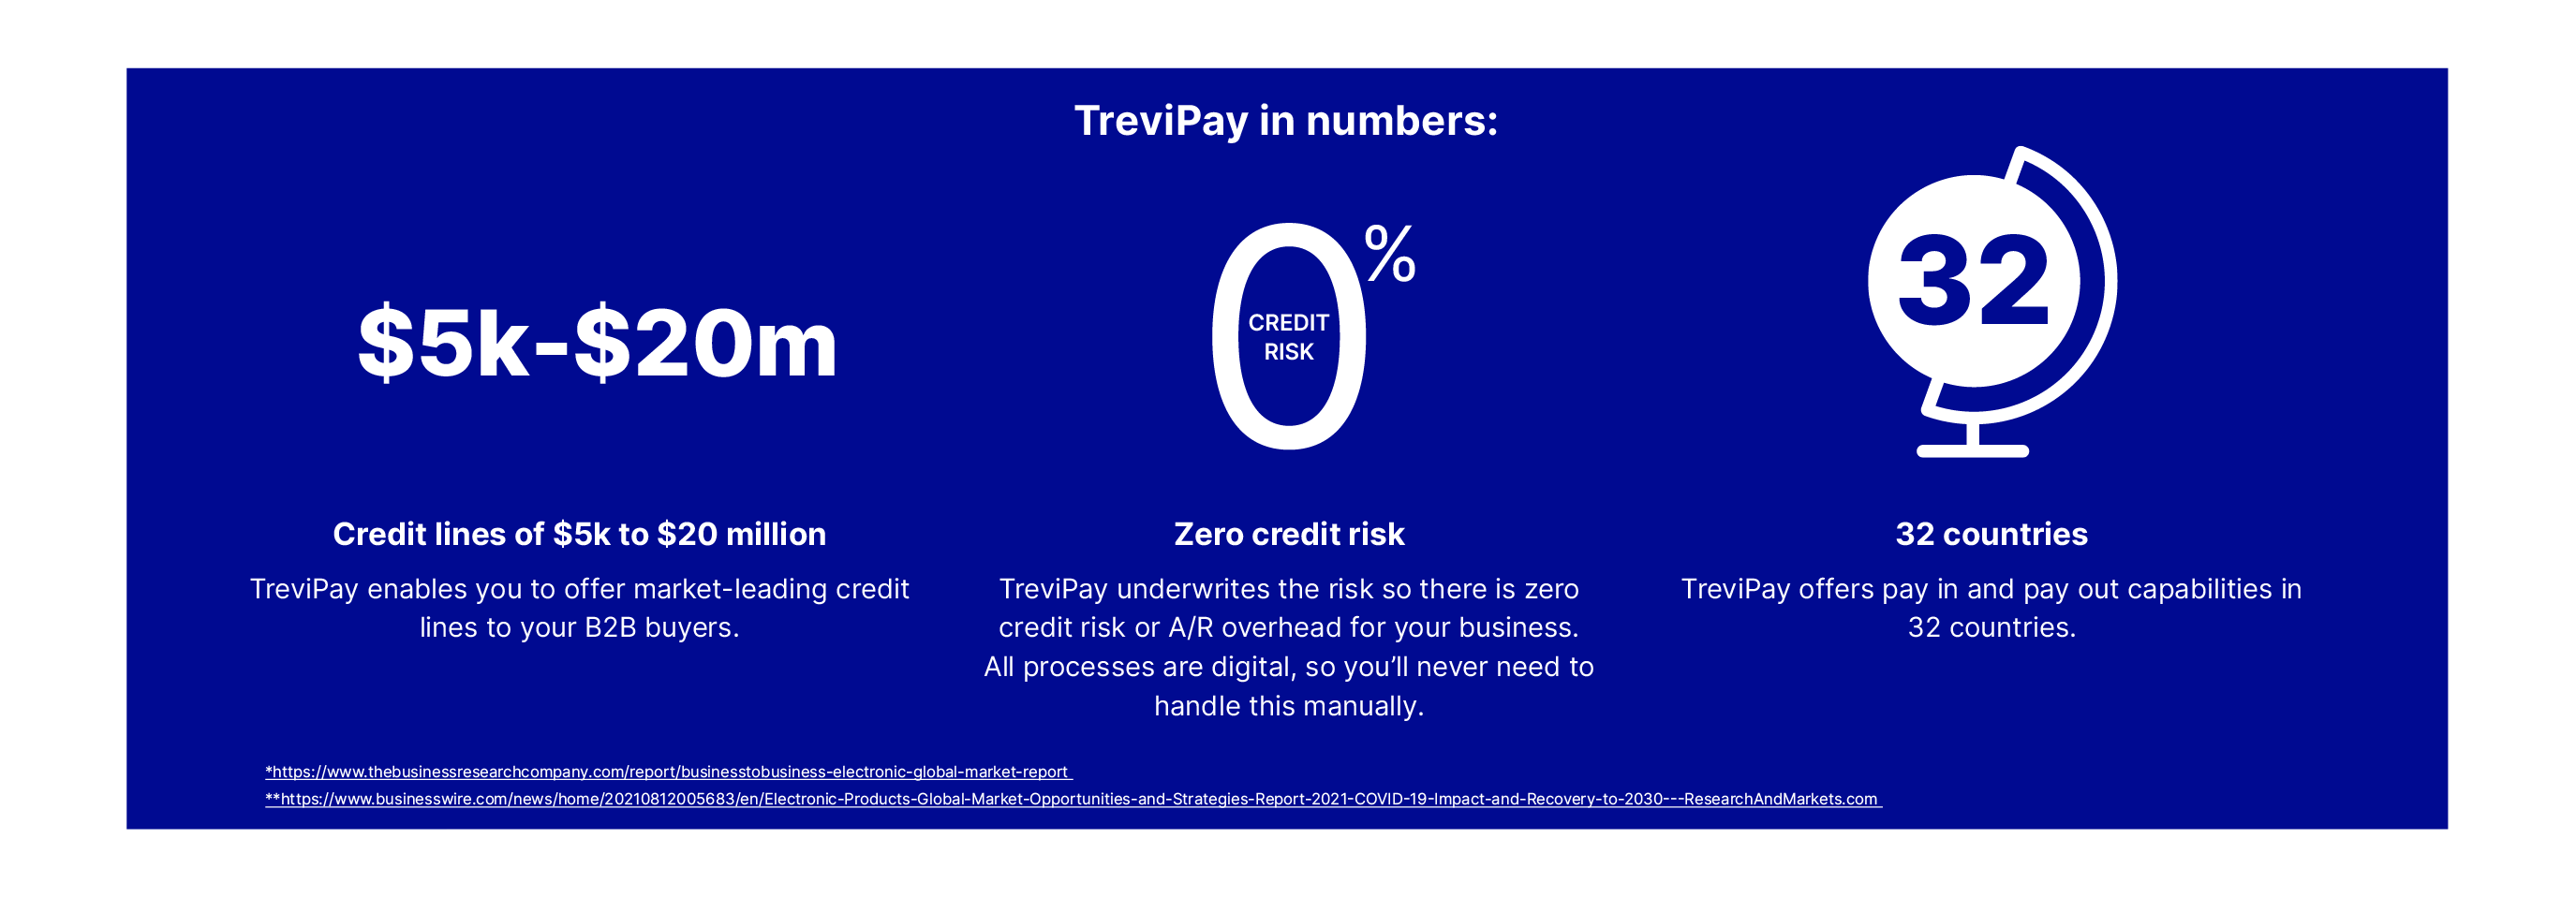 Trevipay in numbers. Three infographics with the information; credit lines of $5k to $20 million, zero credit risk, 32 countries.